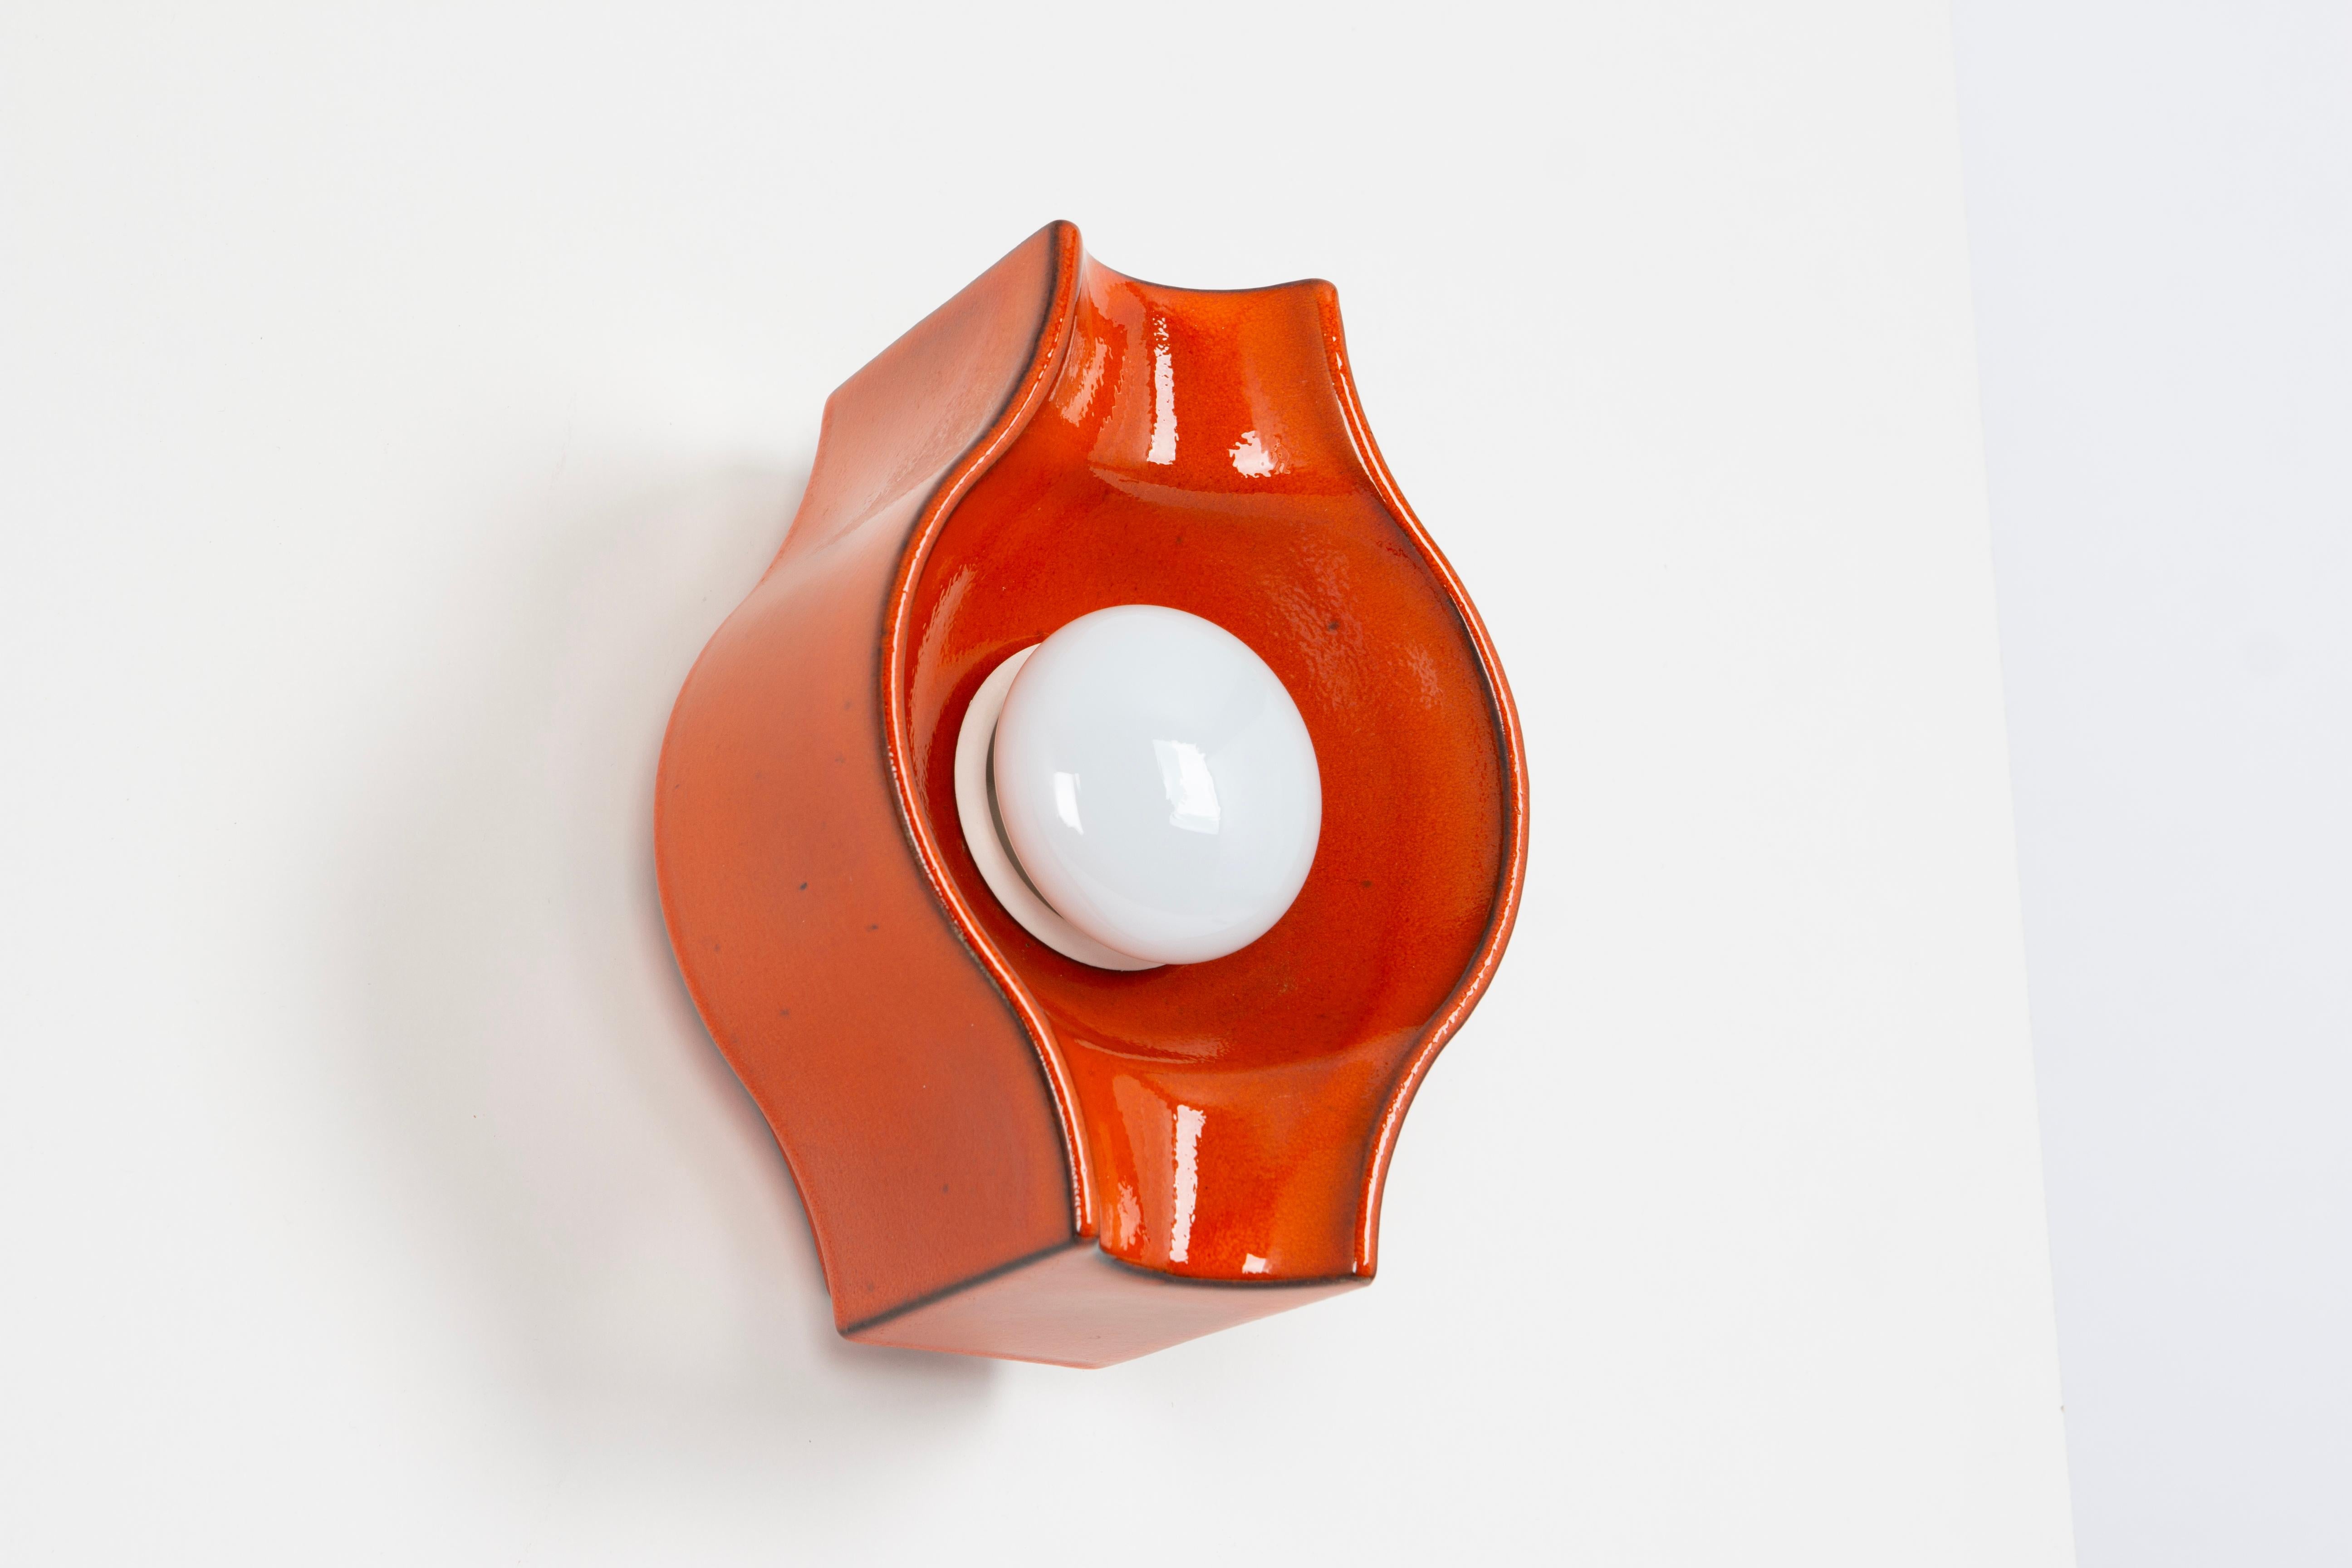 1 of 6 ceramic dark orange wall light Sputnik designed by Cari Zalloni Germany, 1970s

Heavy quality and in very good condition. Cleaned, well-wired, and ready to use. 

Each fixture requires 1 x E14 small bulb with 40W max each 
Light bulbs are not